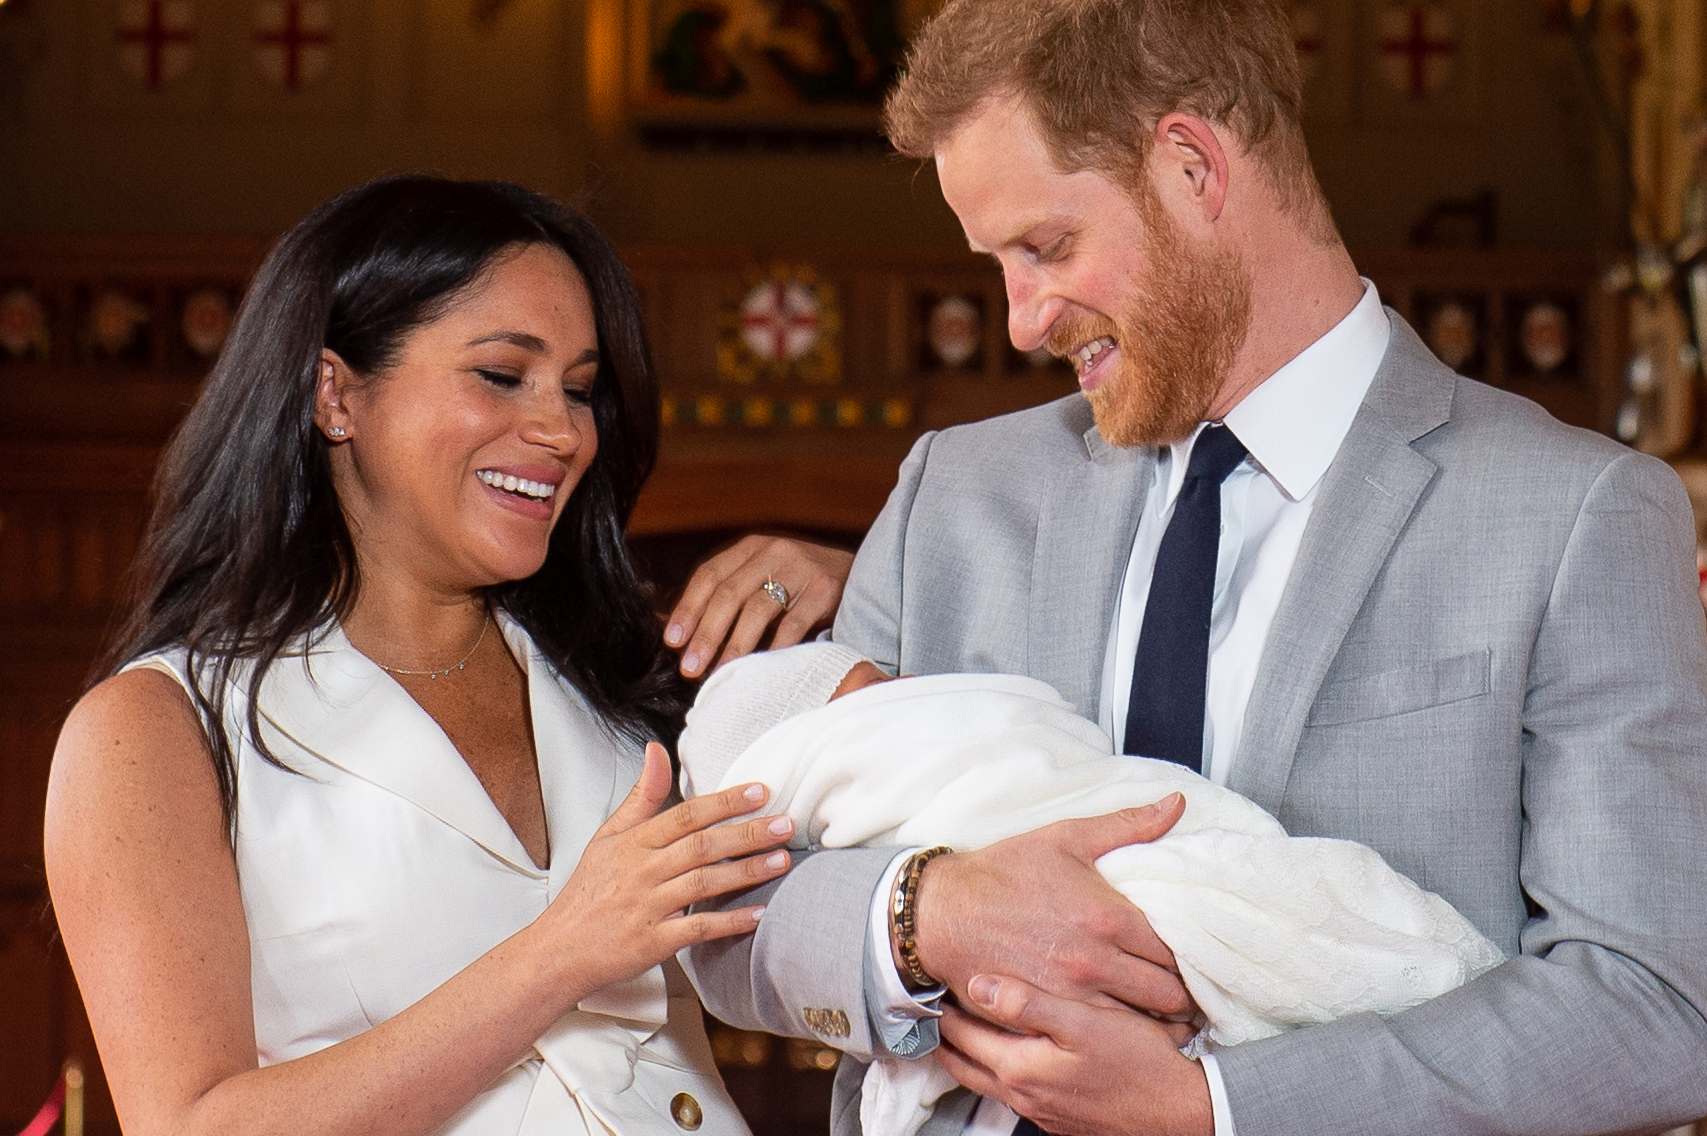 Meghan Markle and Prince Harry holding their son, Archie Mountbatten-Windsor, in St George's Hall at Windsor Castle on May 8, 2019 in Windsor, England. | Source: Getty Images